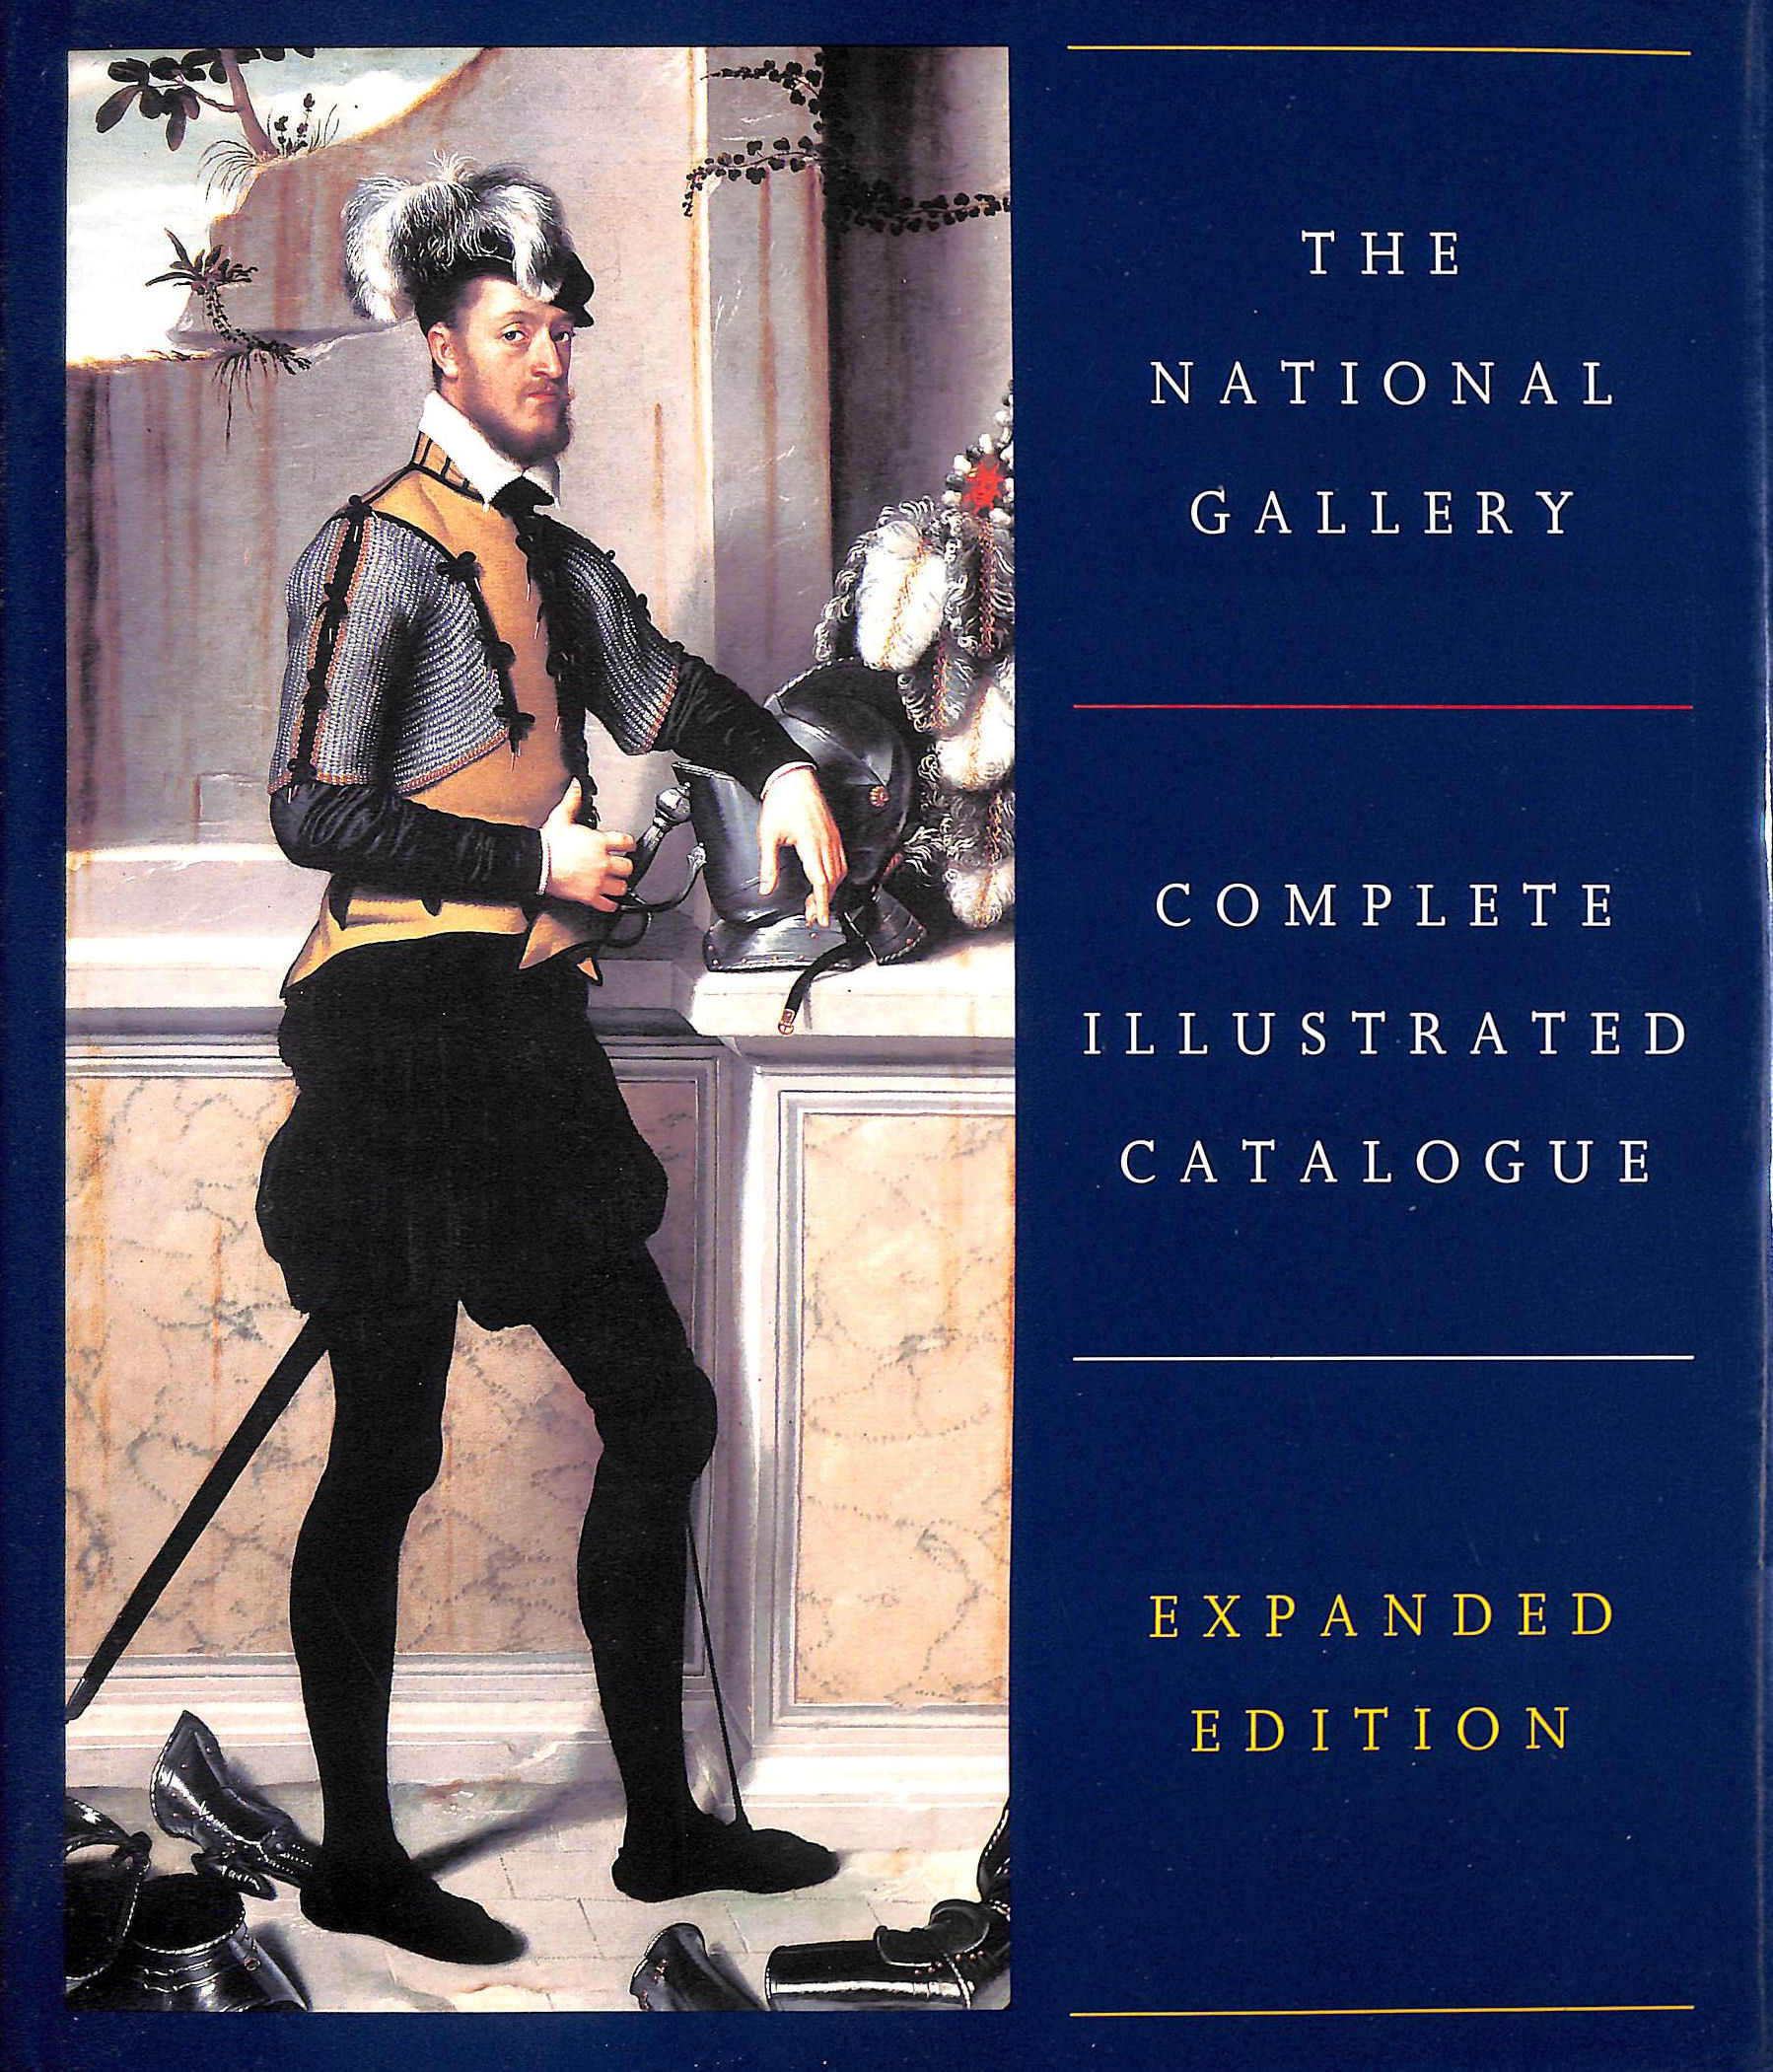 the complete illustration guide by larry evans pdf download